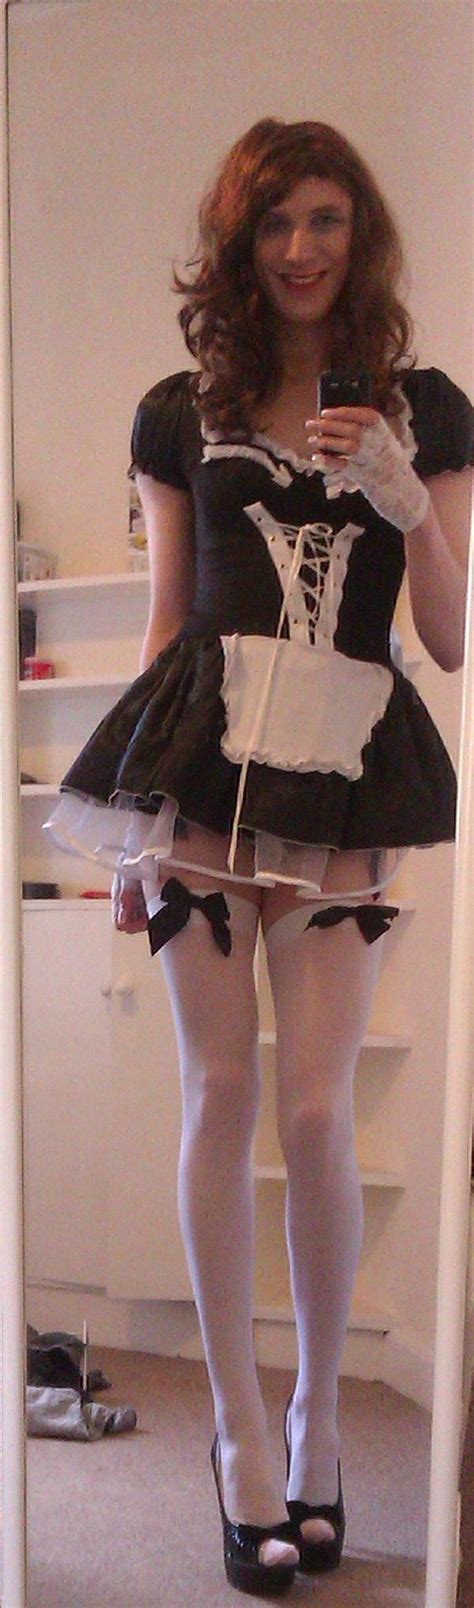 french maid by mezuki111 on deviantart french maid dress maid outfit